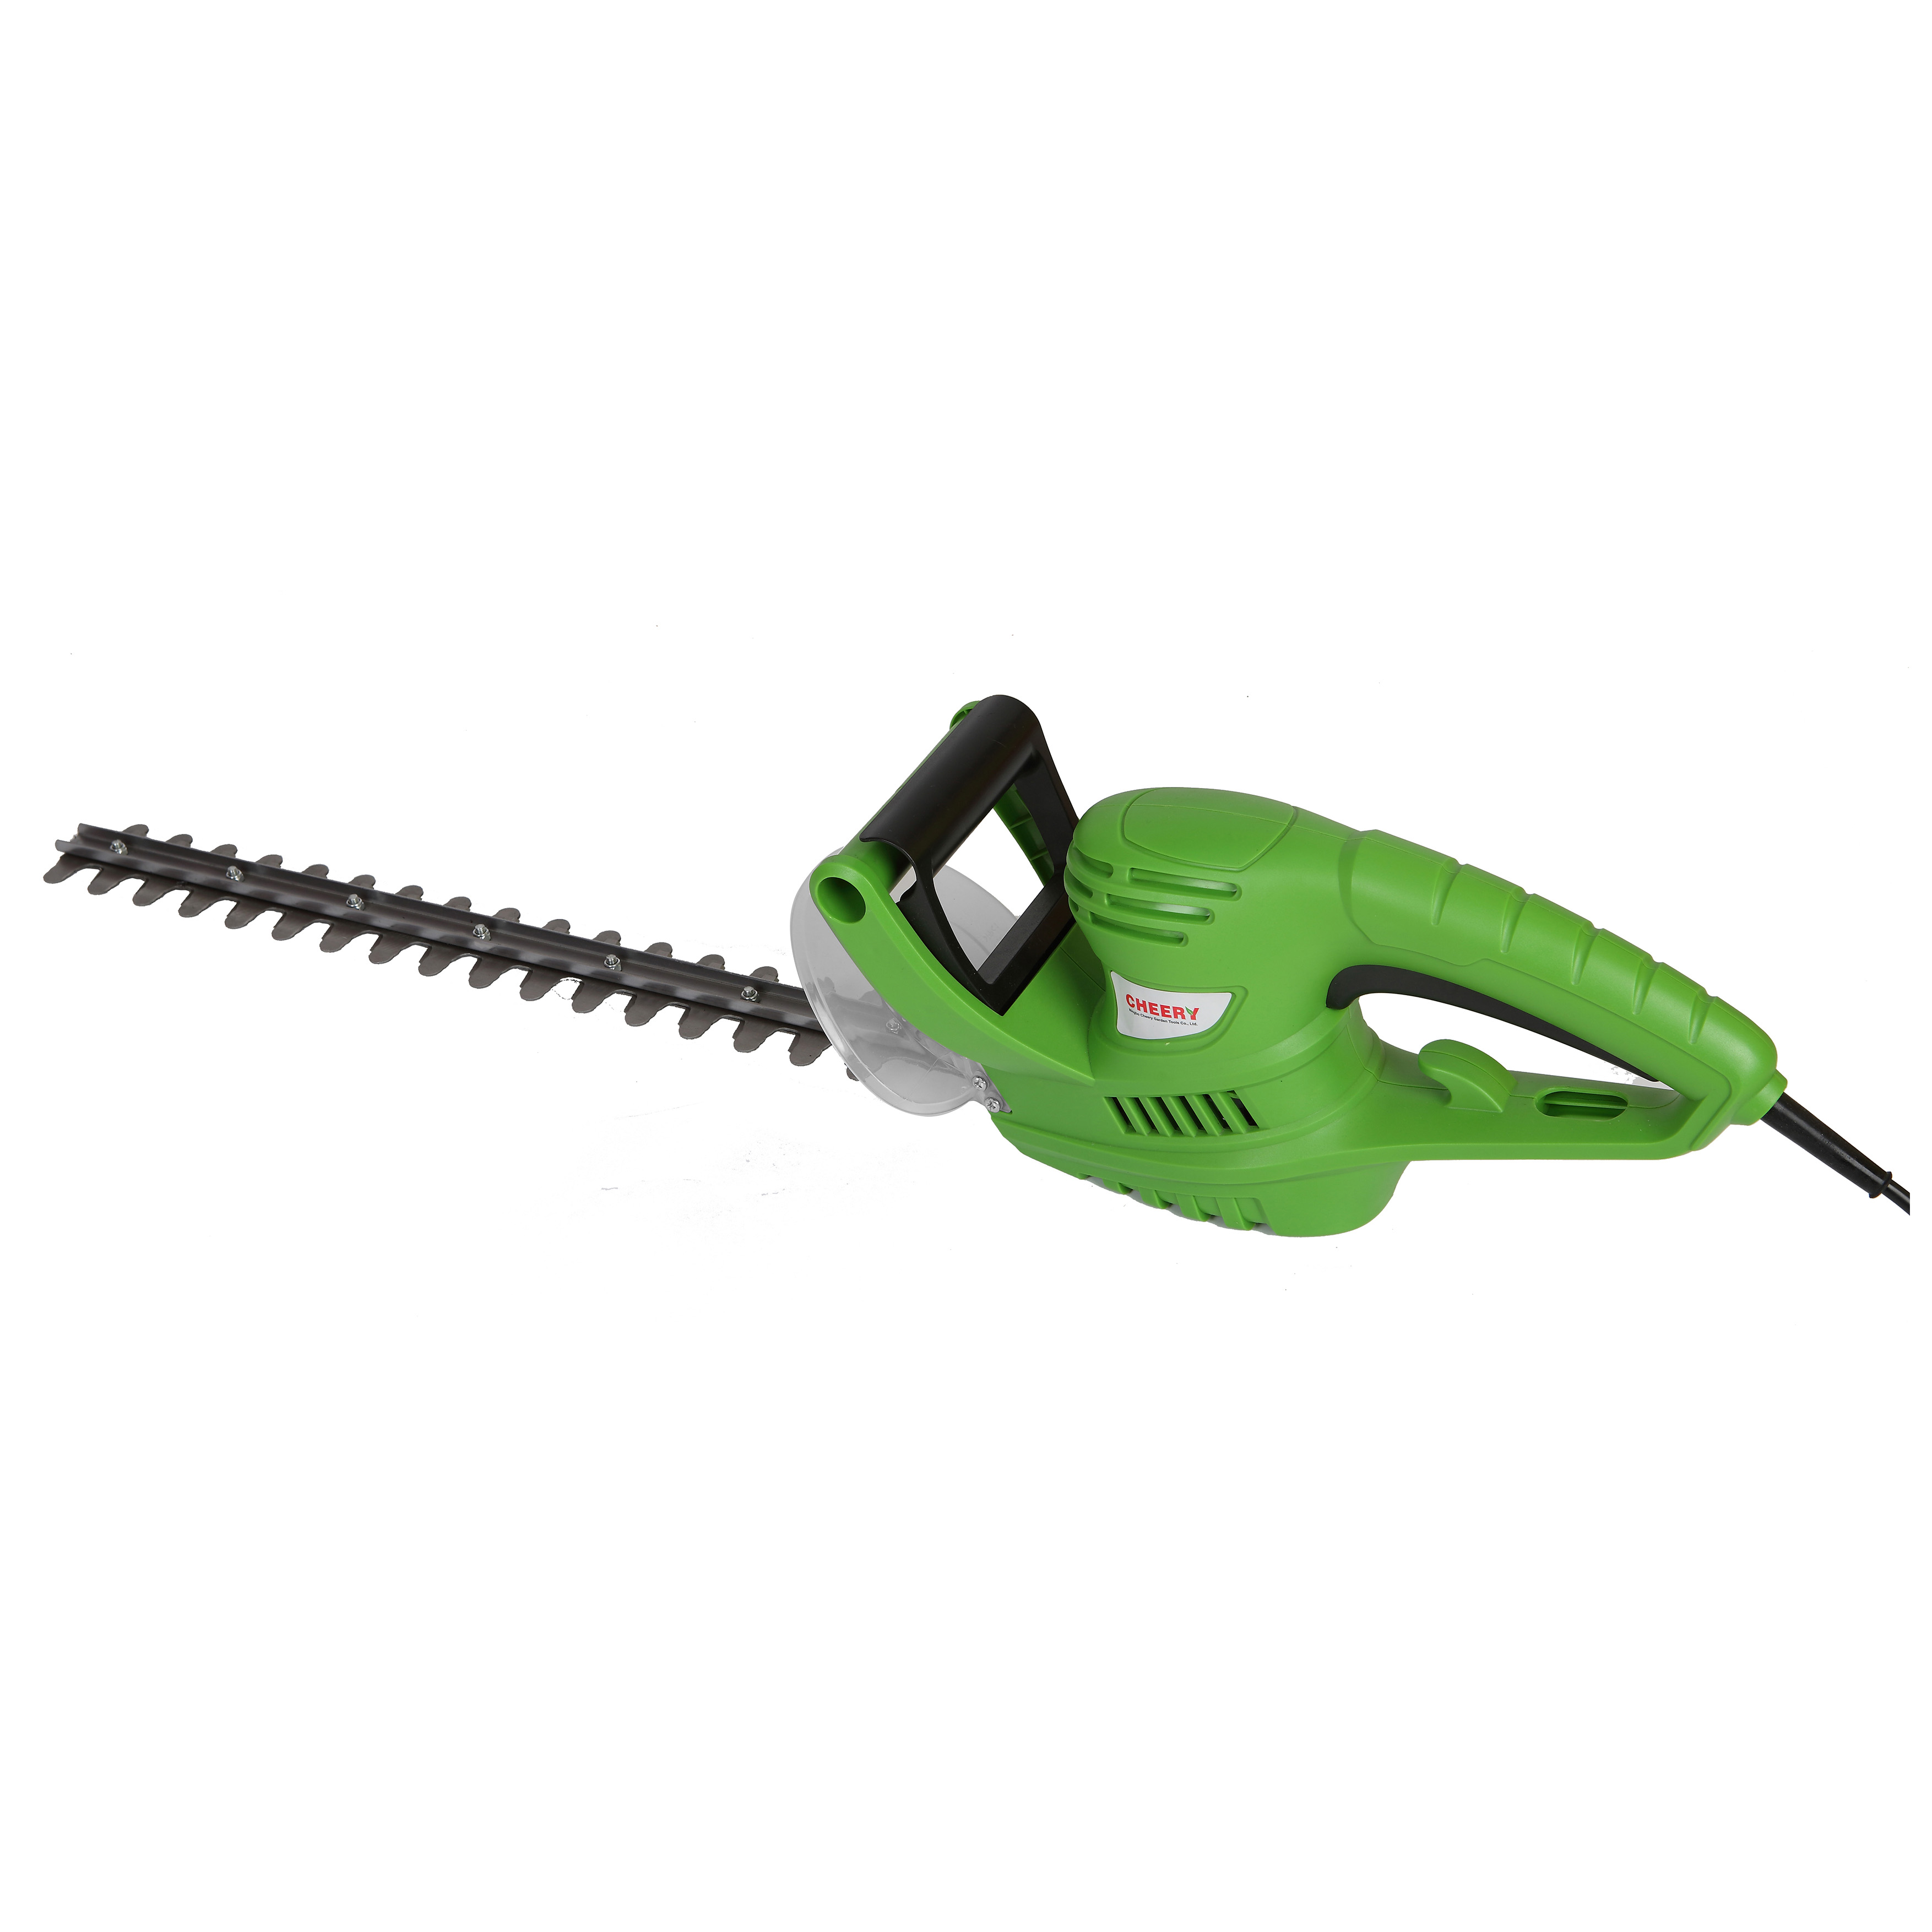 Electric　hedge　trimmer